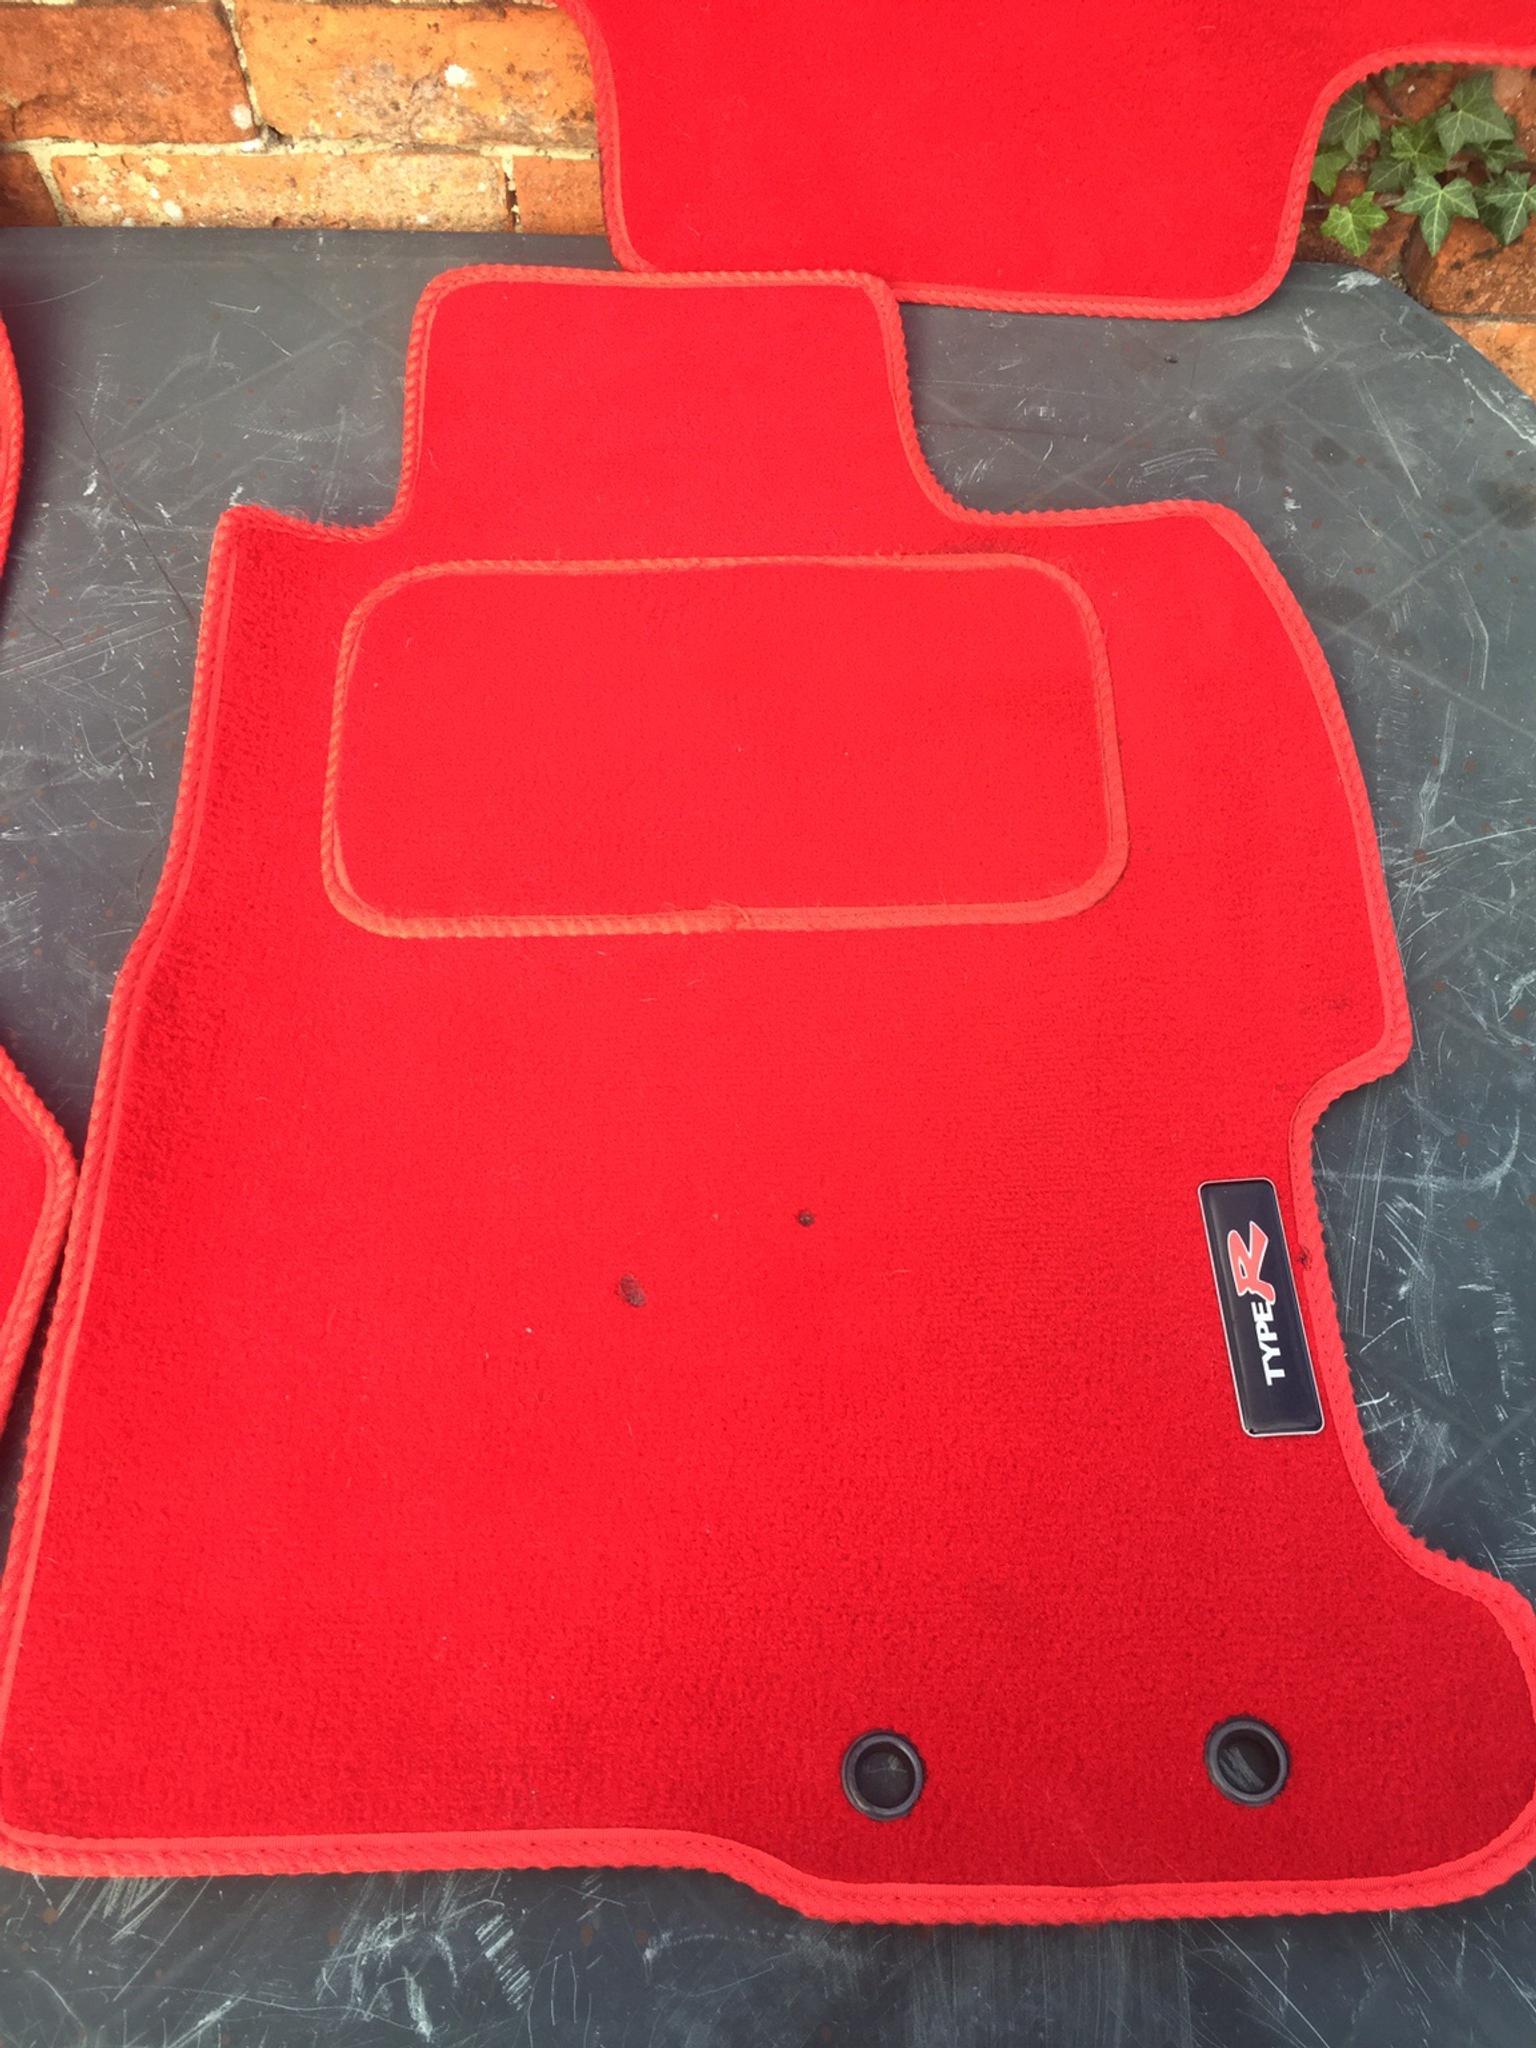 Honda Civic Type R Floor Mats Or Type S In Rg30 Reading For 40 00 For Sale Shpock